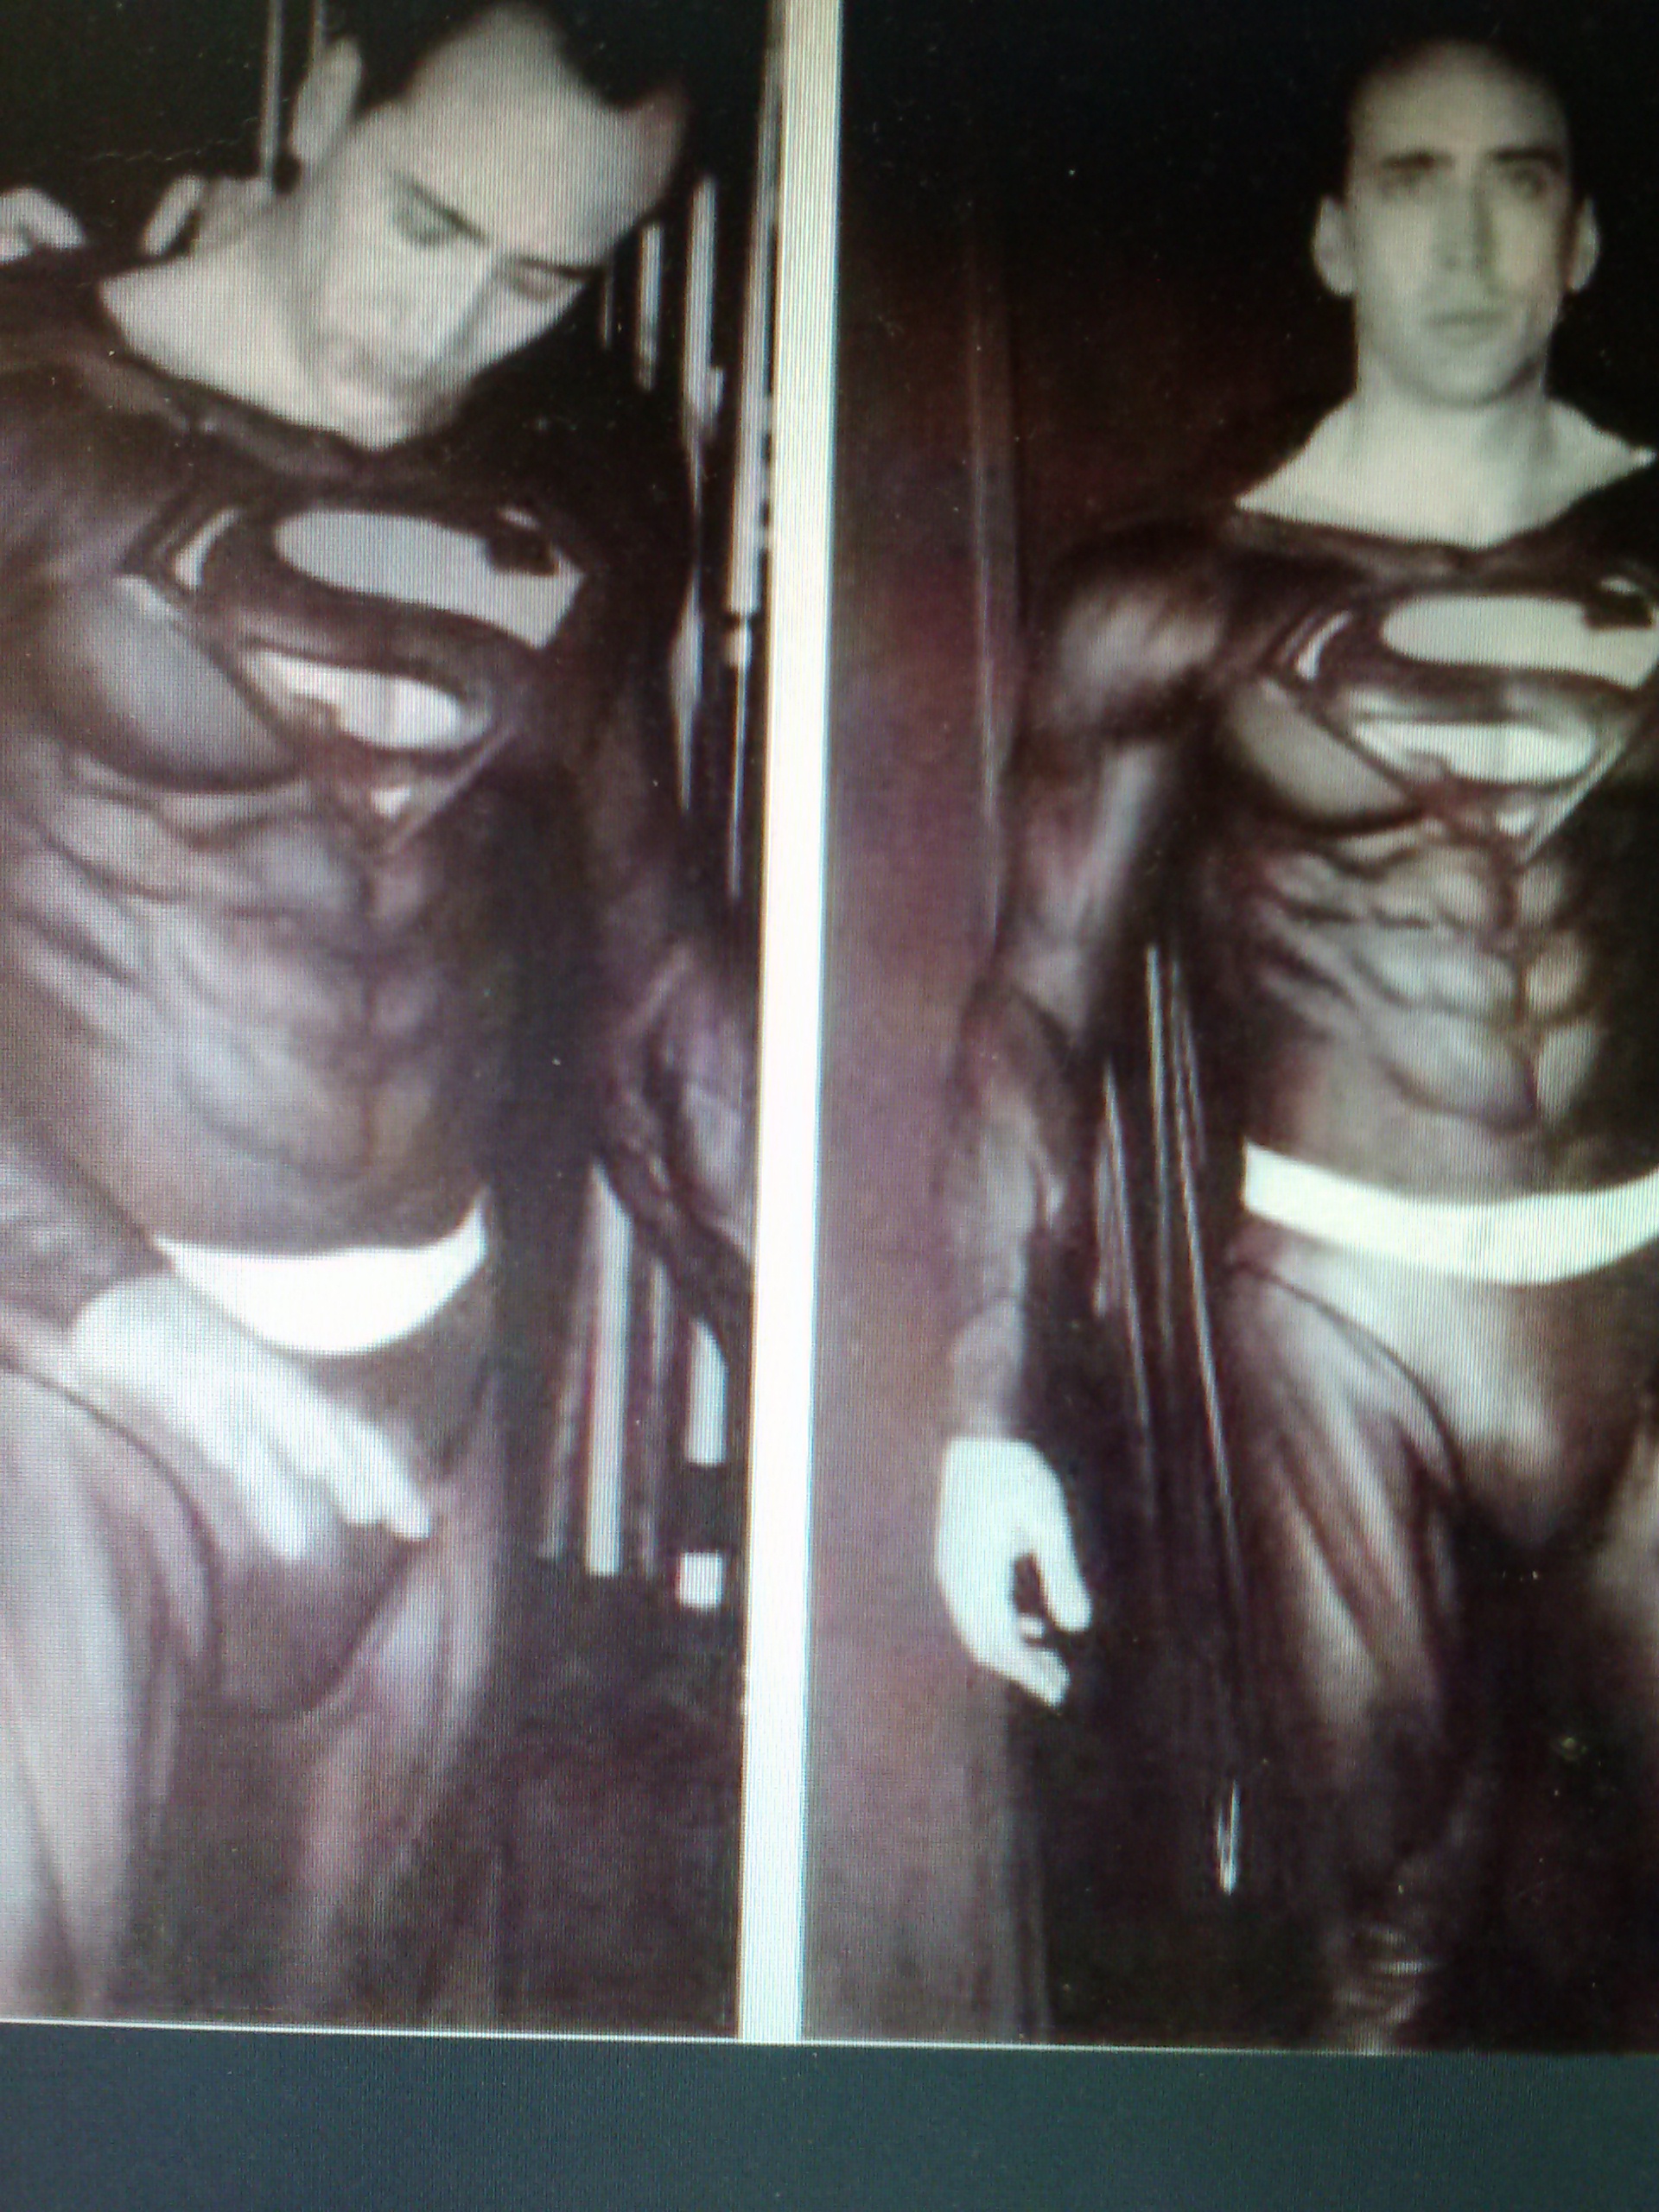 Nick Cage as superman, You don't say!